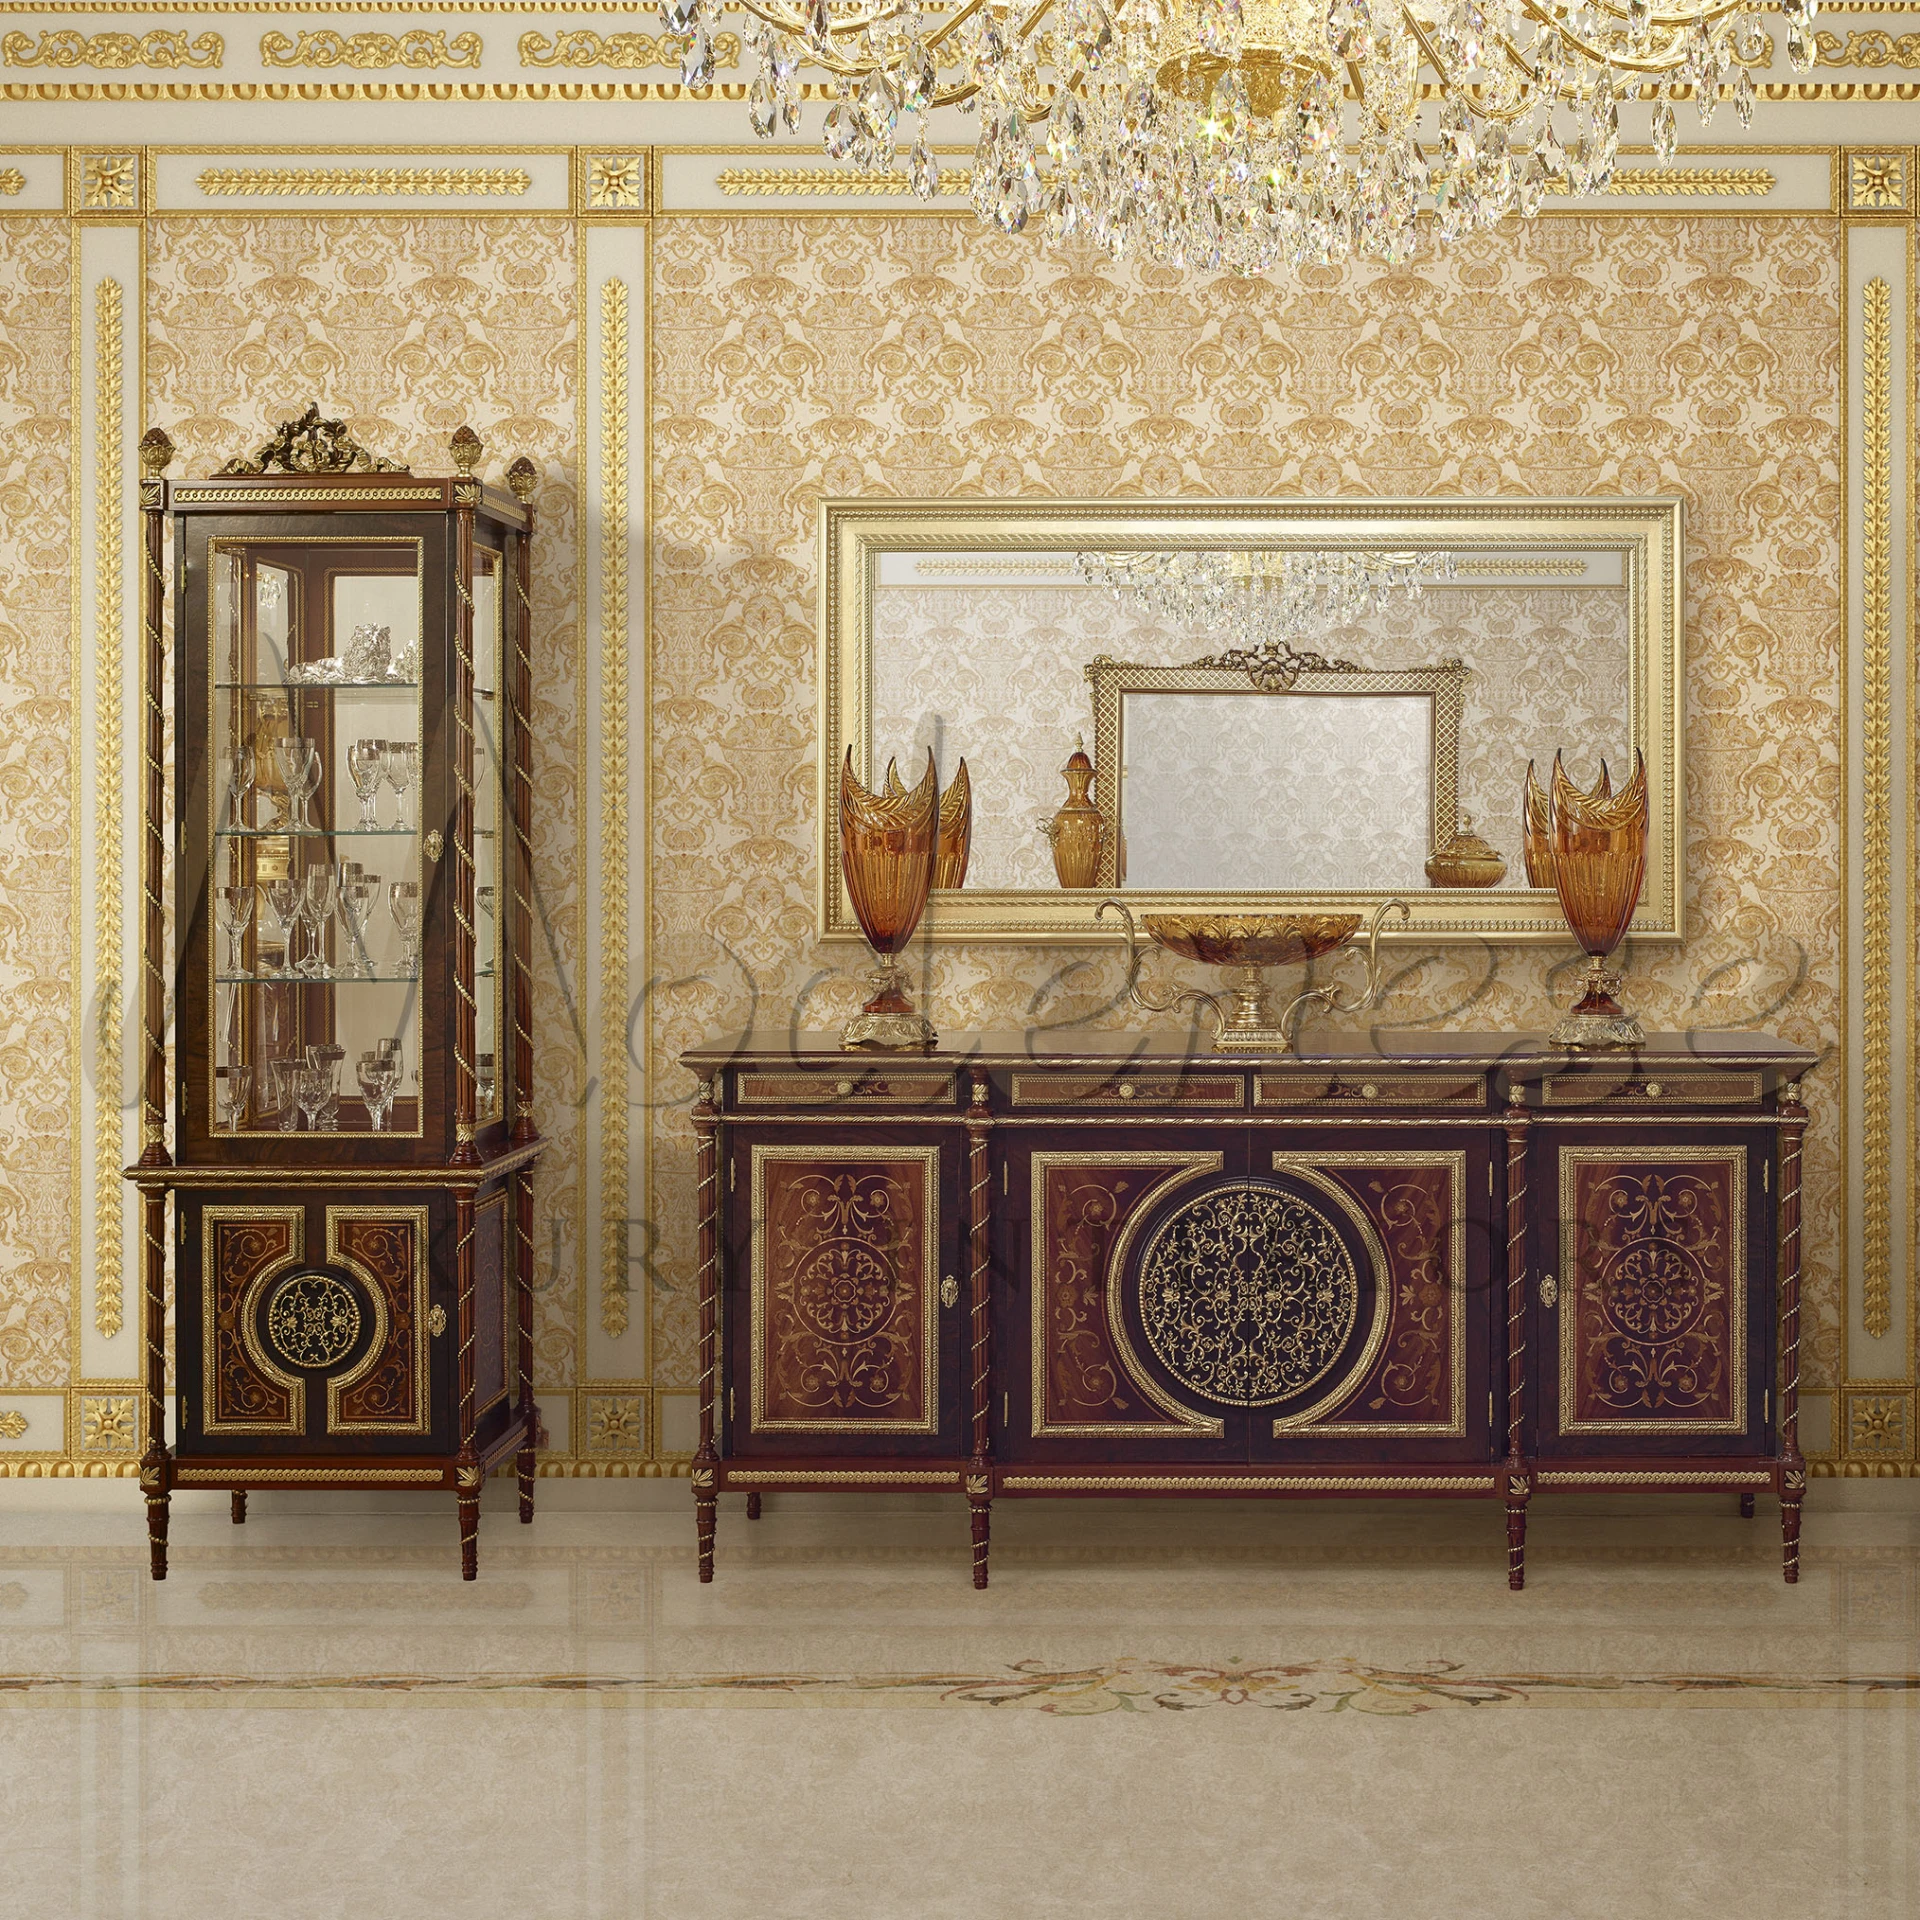 Transform your home into a palace with Modenese Luxury Interior. This vitrine showcases intricate inlays, gold leaf decorations, and baroque elements.